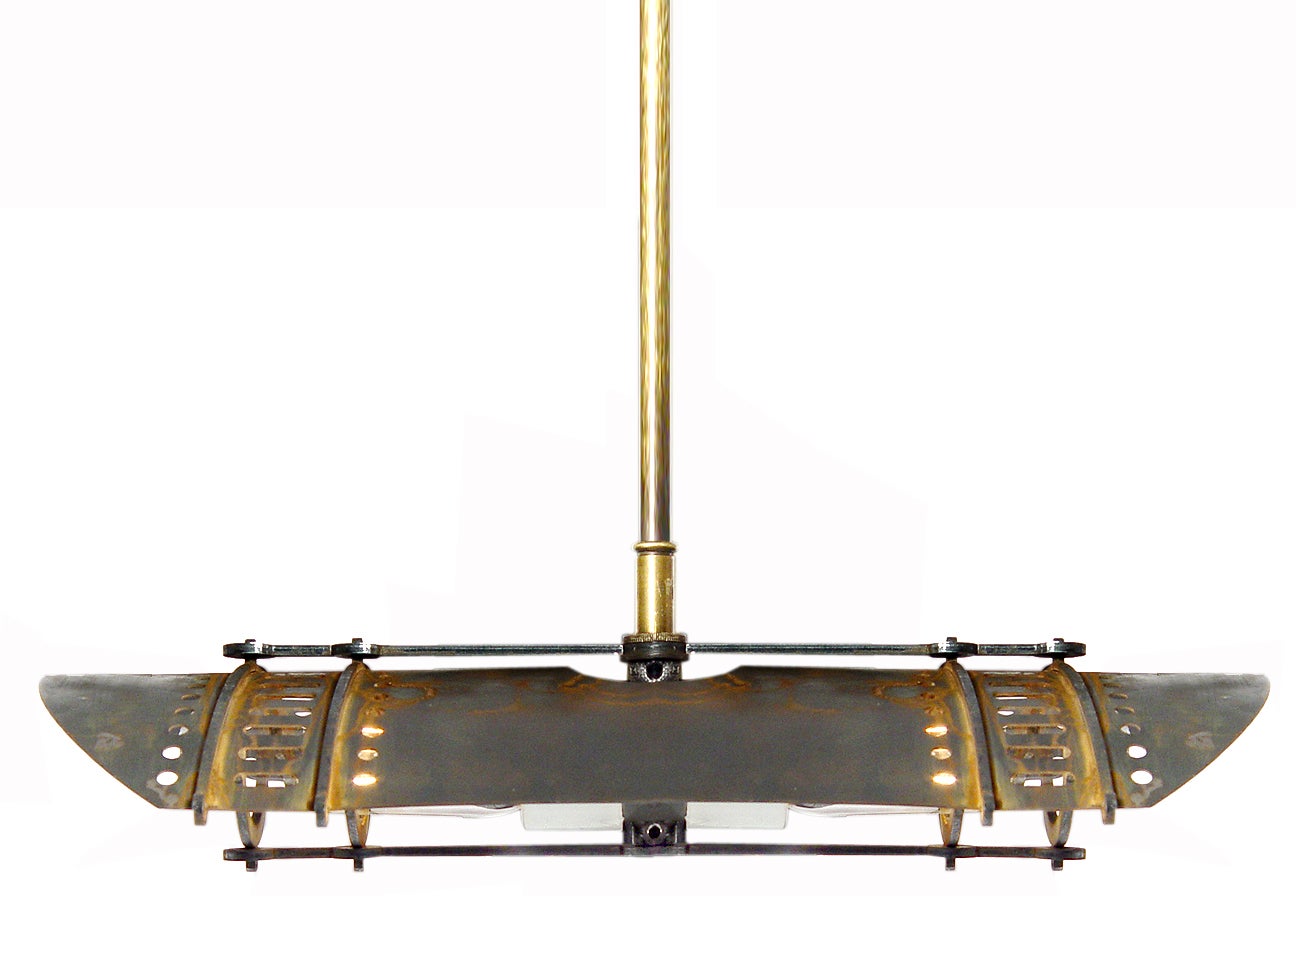 Steel and Brass Arched Shade Pendent